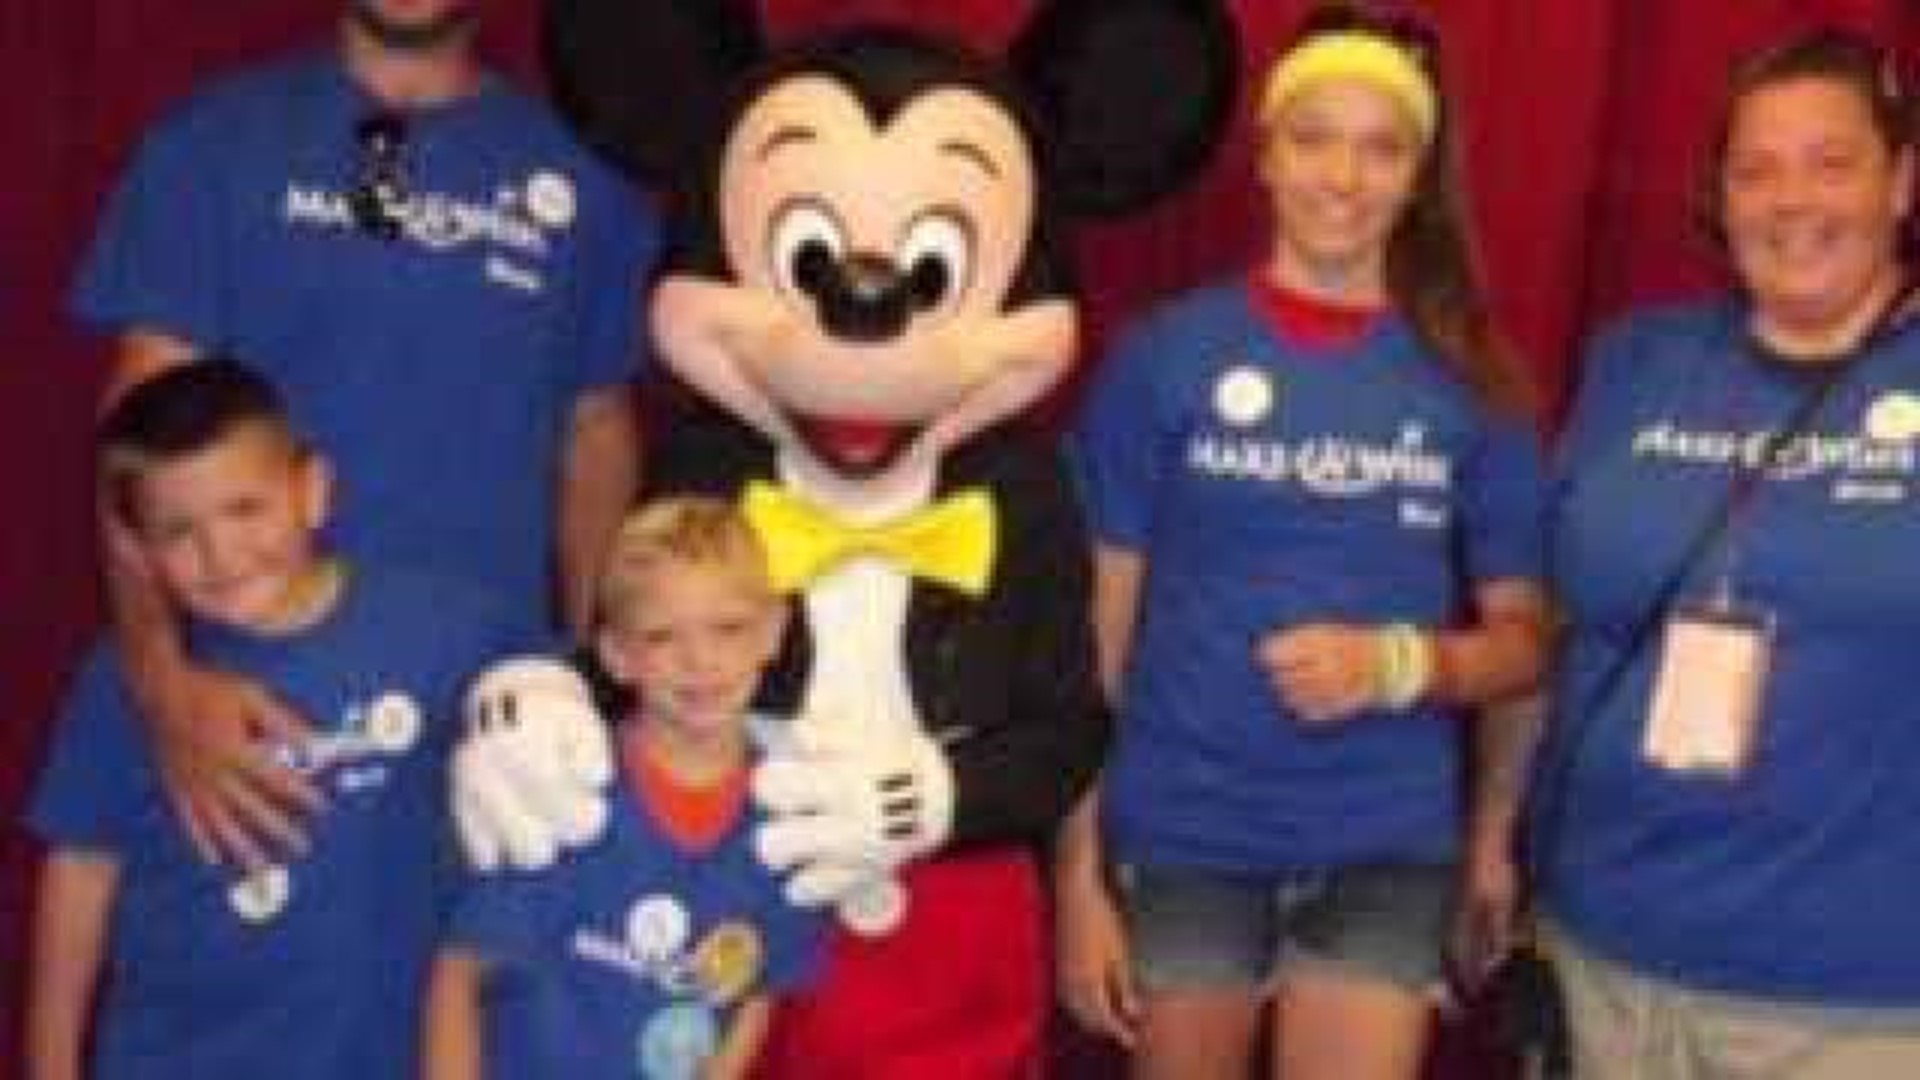 Local kid meets Mickey Mouse on Make-A-Wish trip